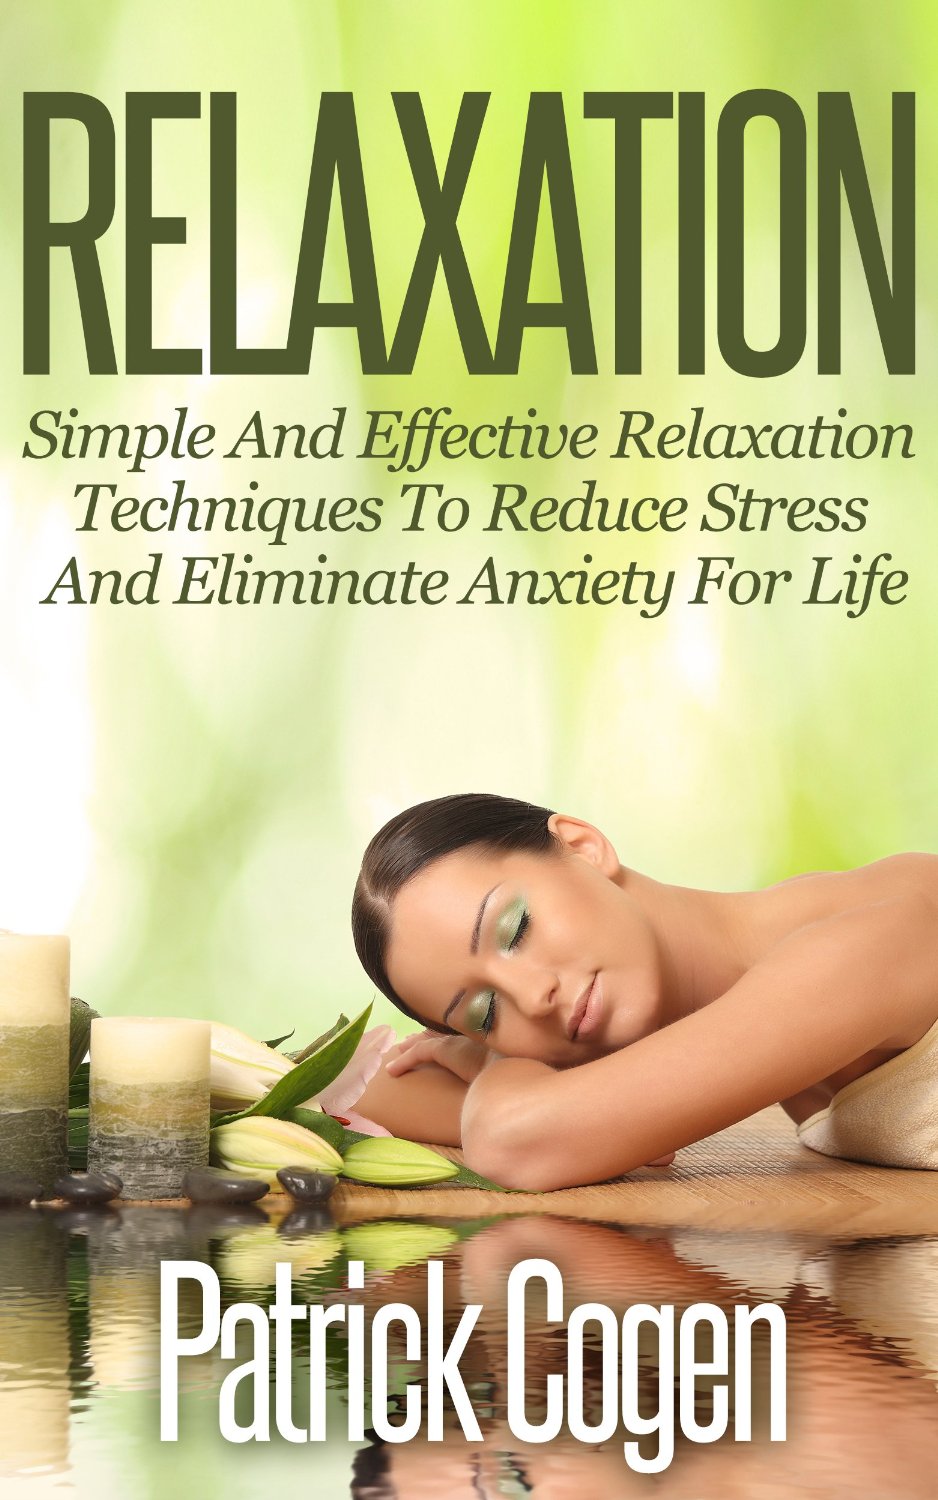 Relaxation – Simple And Effective Relaxation Techniques To Reduce Stress And Eliminate Anxiety For Life by Patrick Cogen